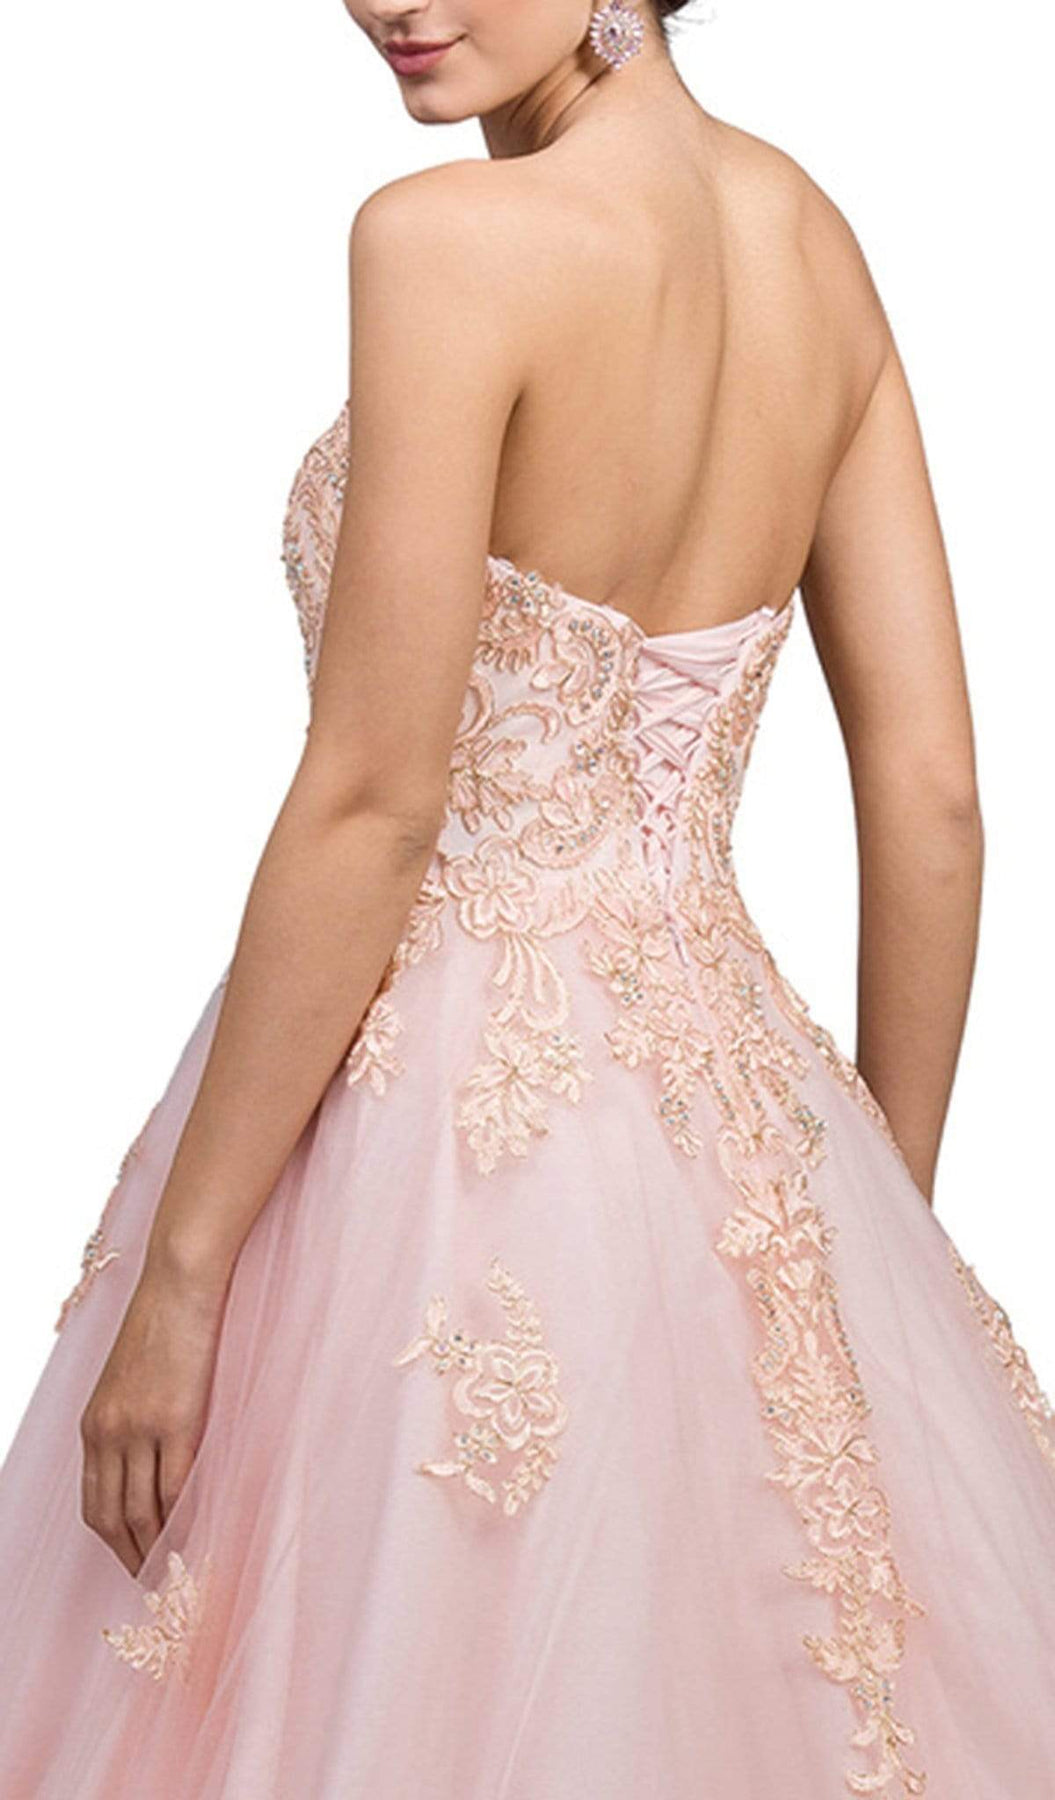 Dancing Queen - 1204 Strapless Embellished Sweetheart Prom Ballgown Special Occasion Dress L / Blush